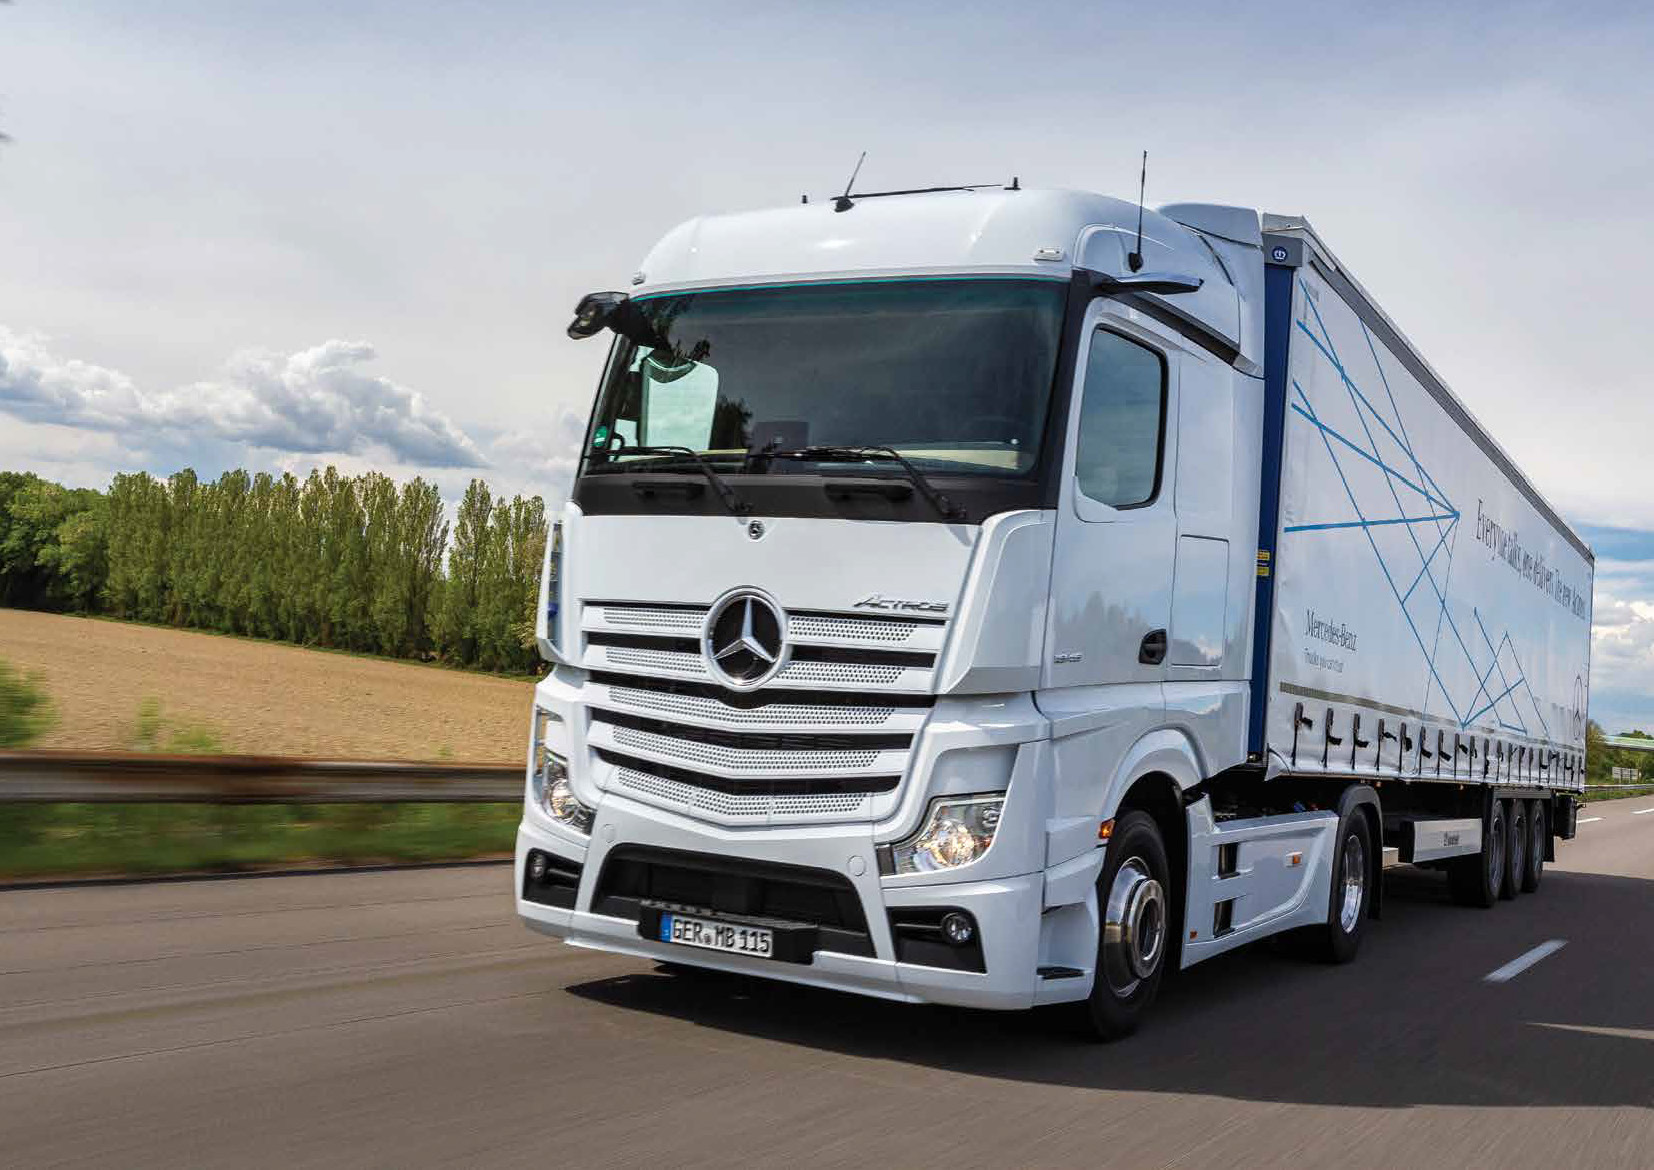 Commercial Vehicle Driver MagazineJune 2019 Cam in the mirror Mercades Benz Actros Review Main Image